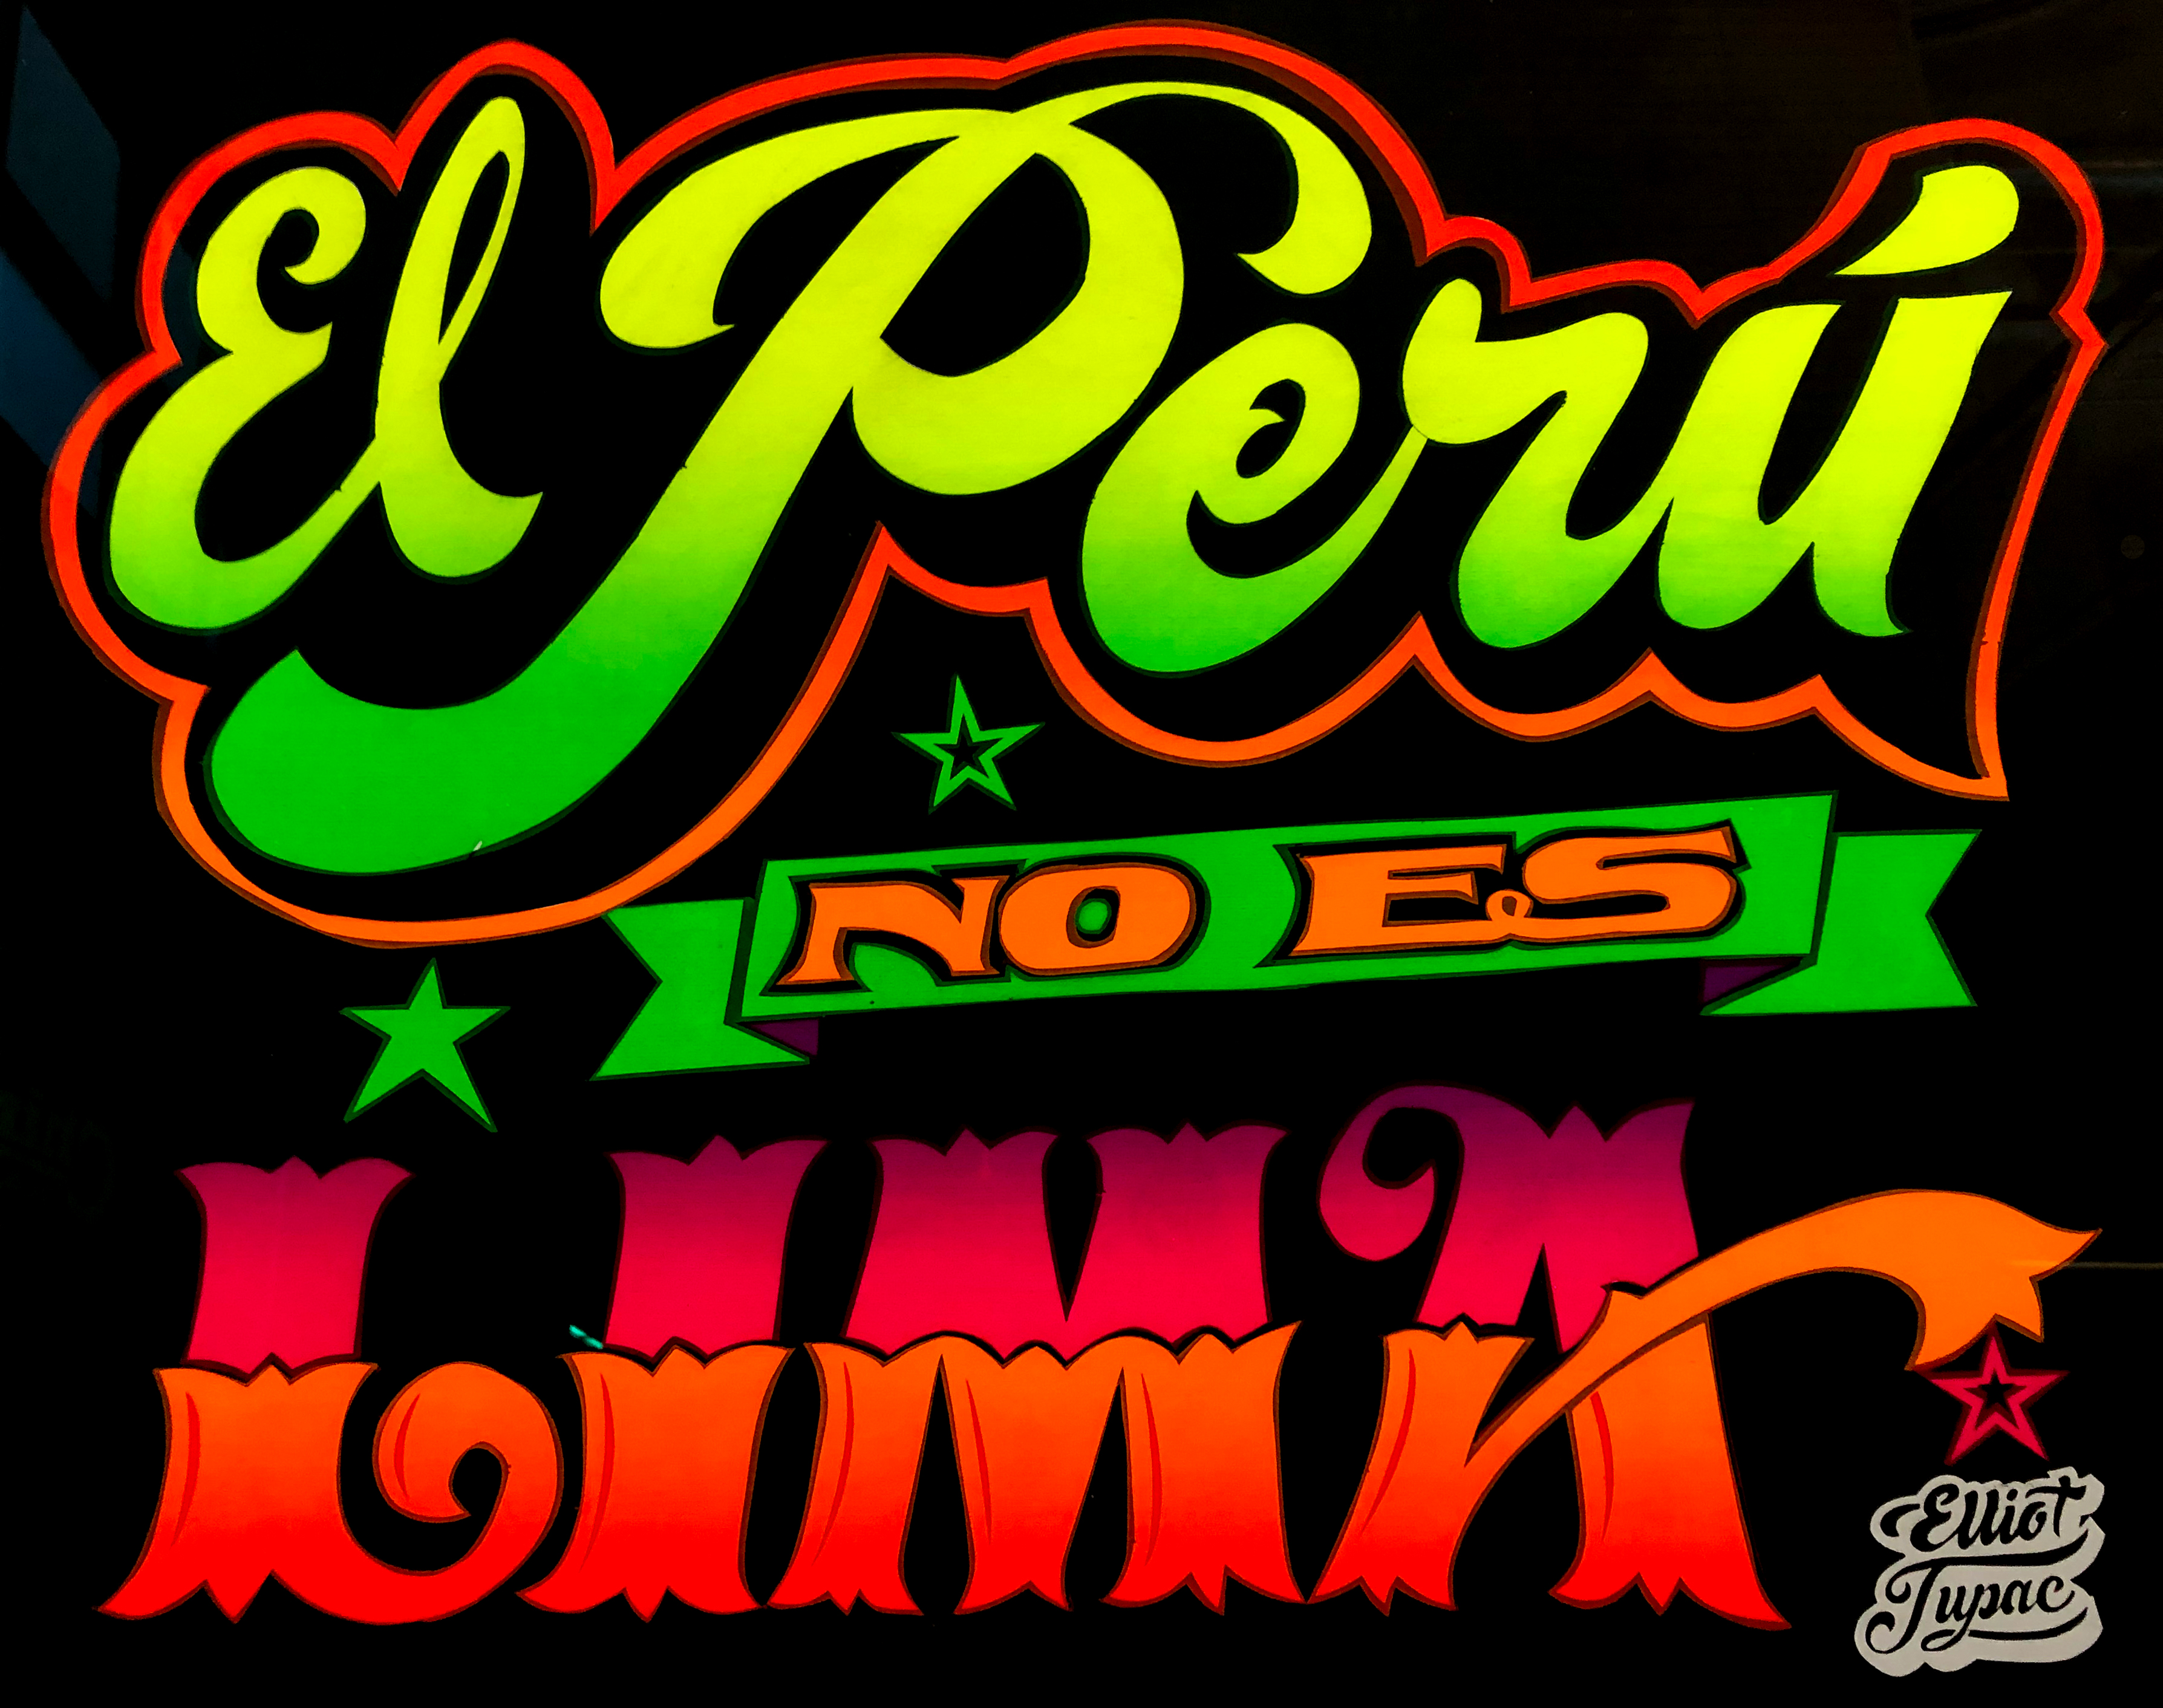 black poster with large scripted text in bright green and red letters spelling out "El Peru no es Lima"